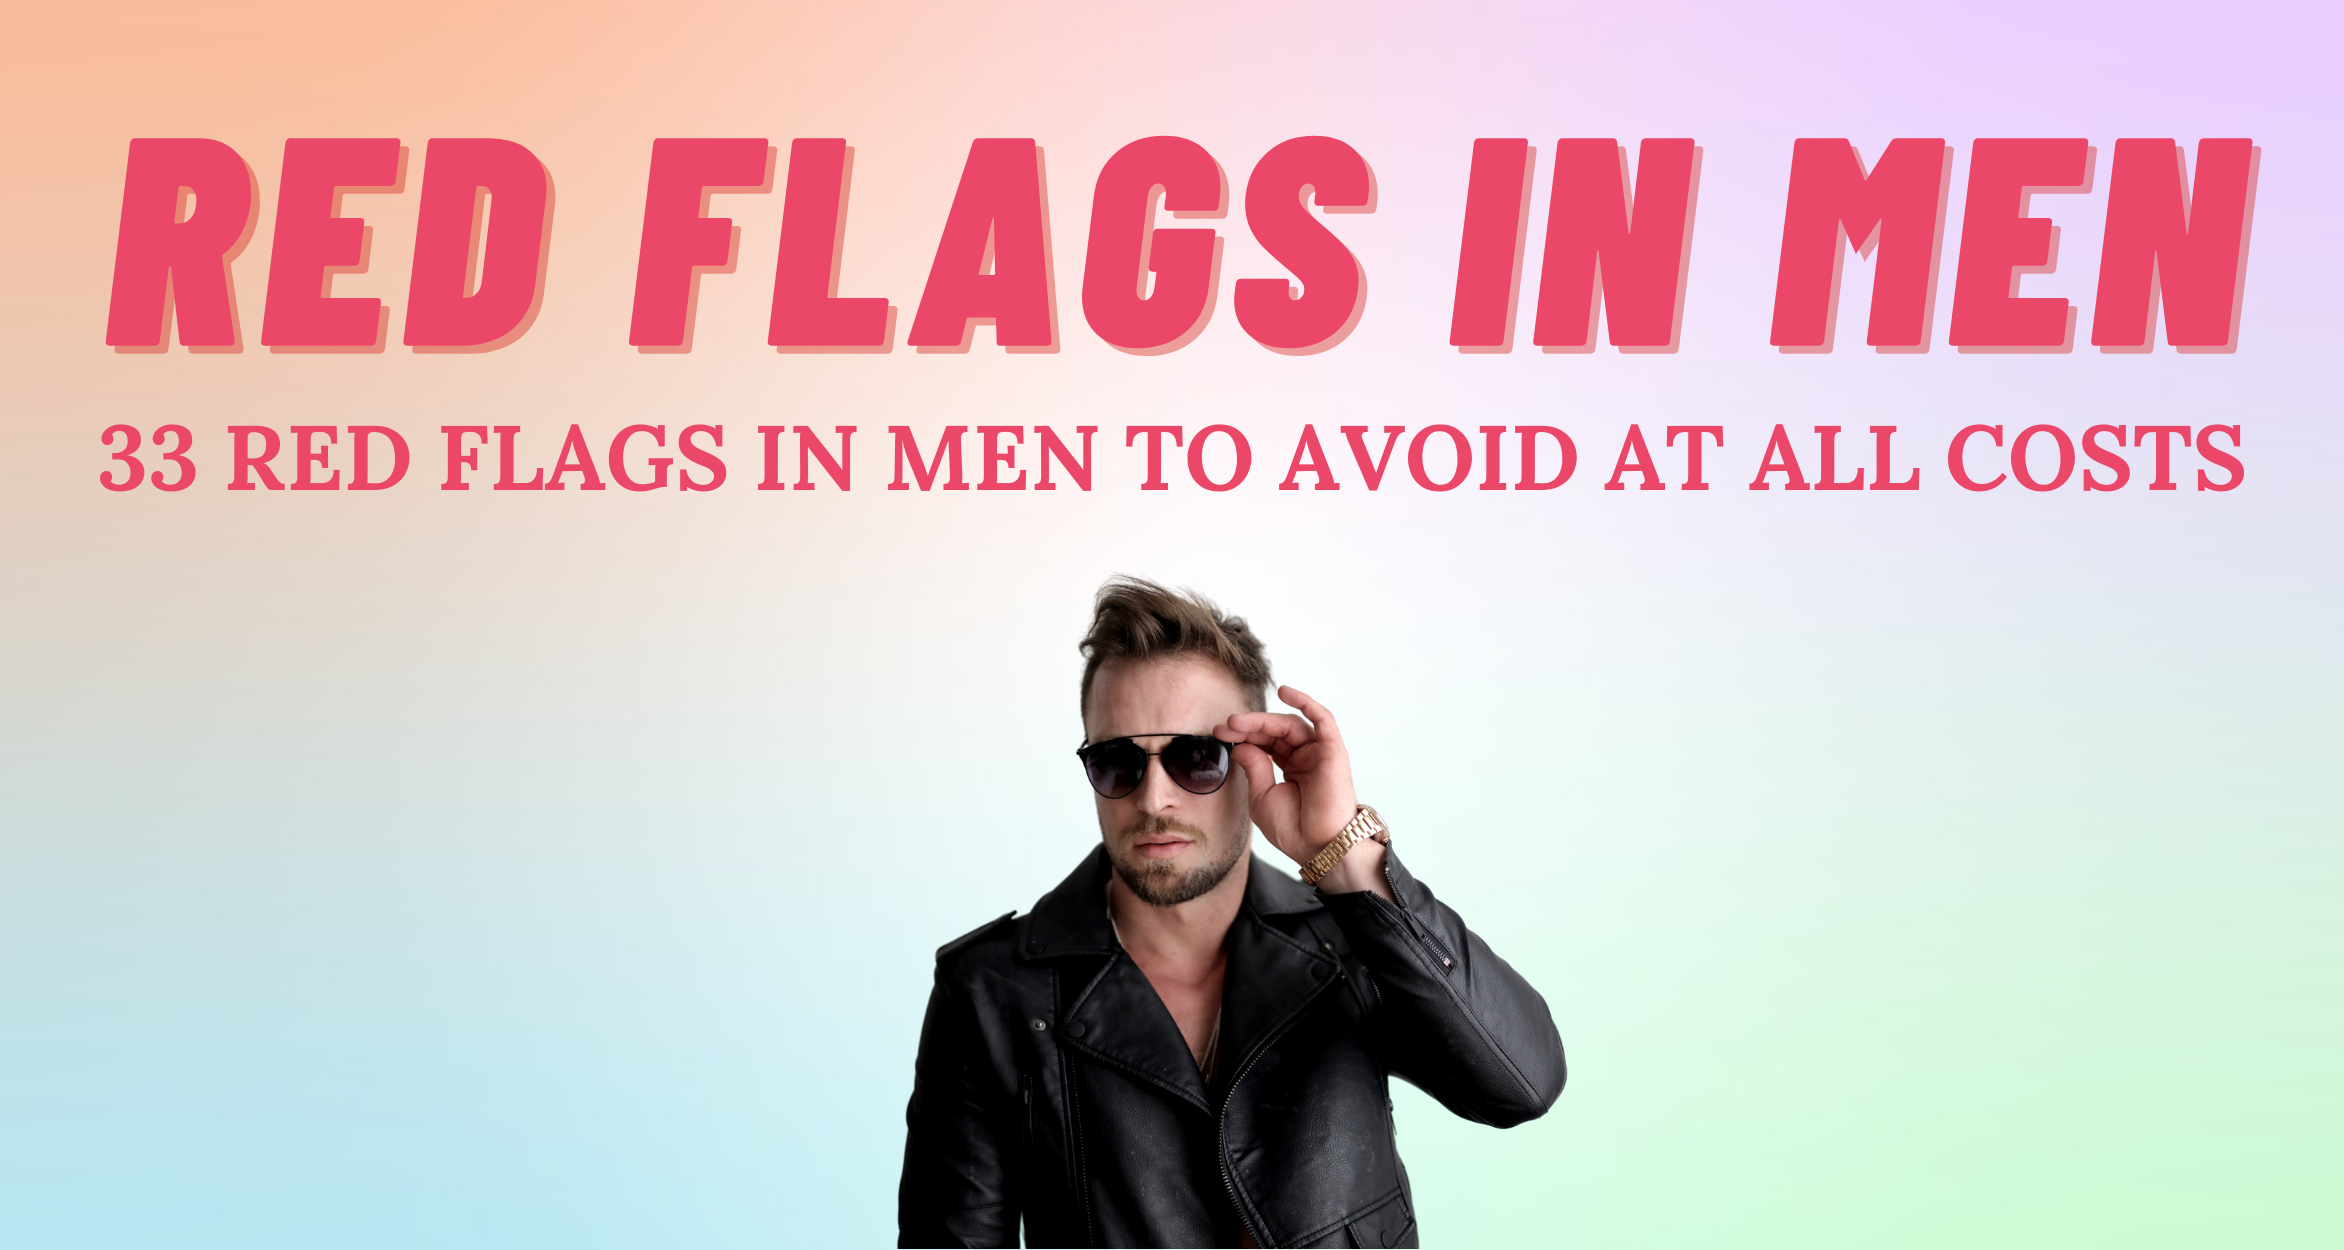 Red Flags in Men's Communication: What They're Really Saying